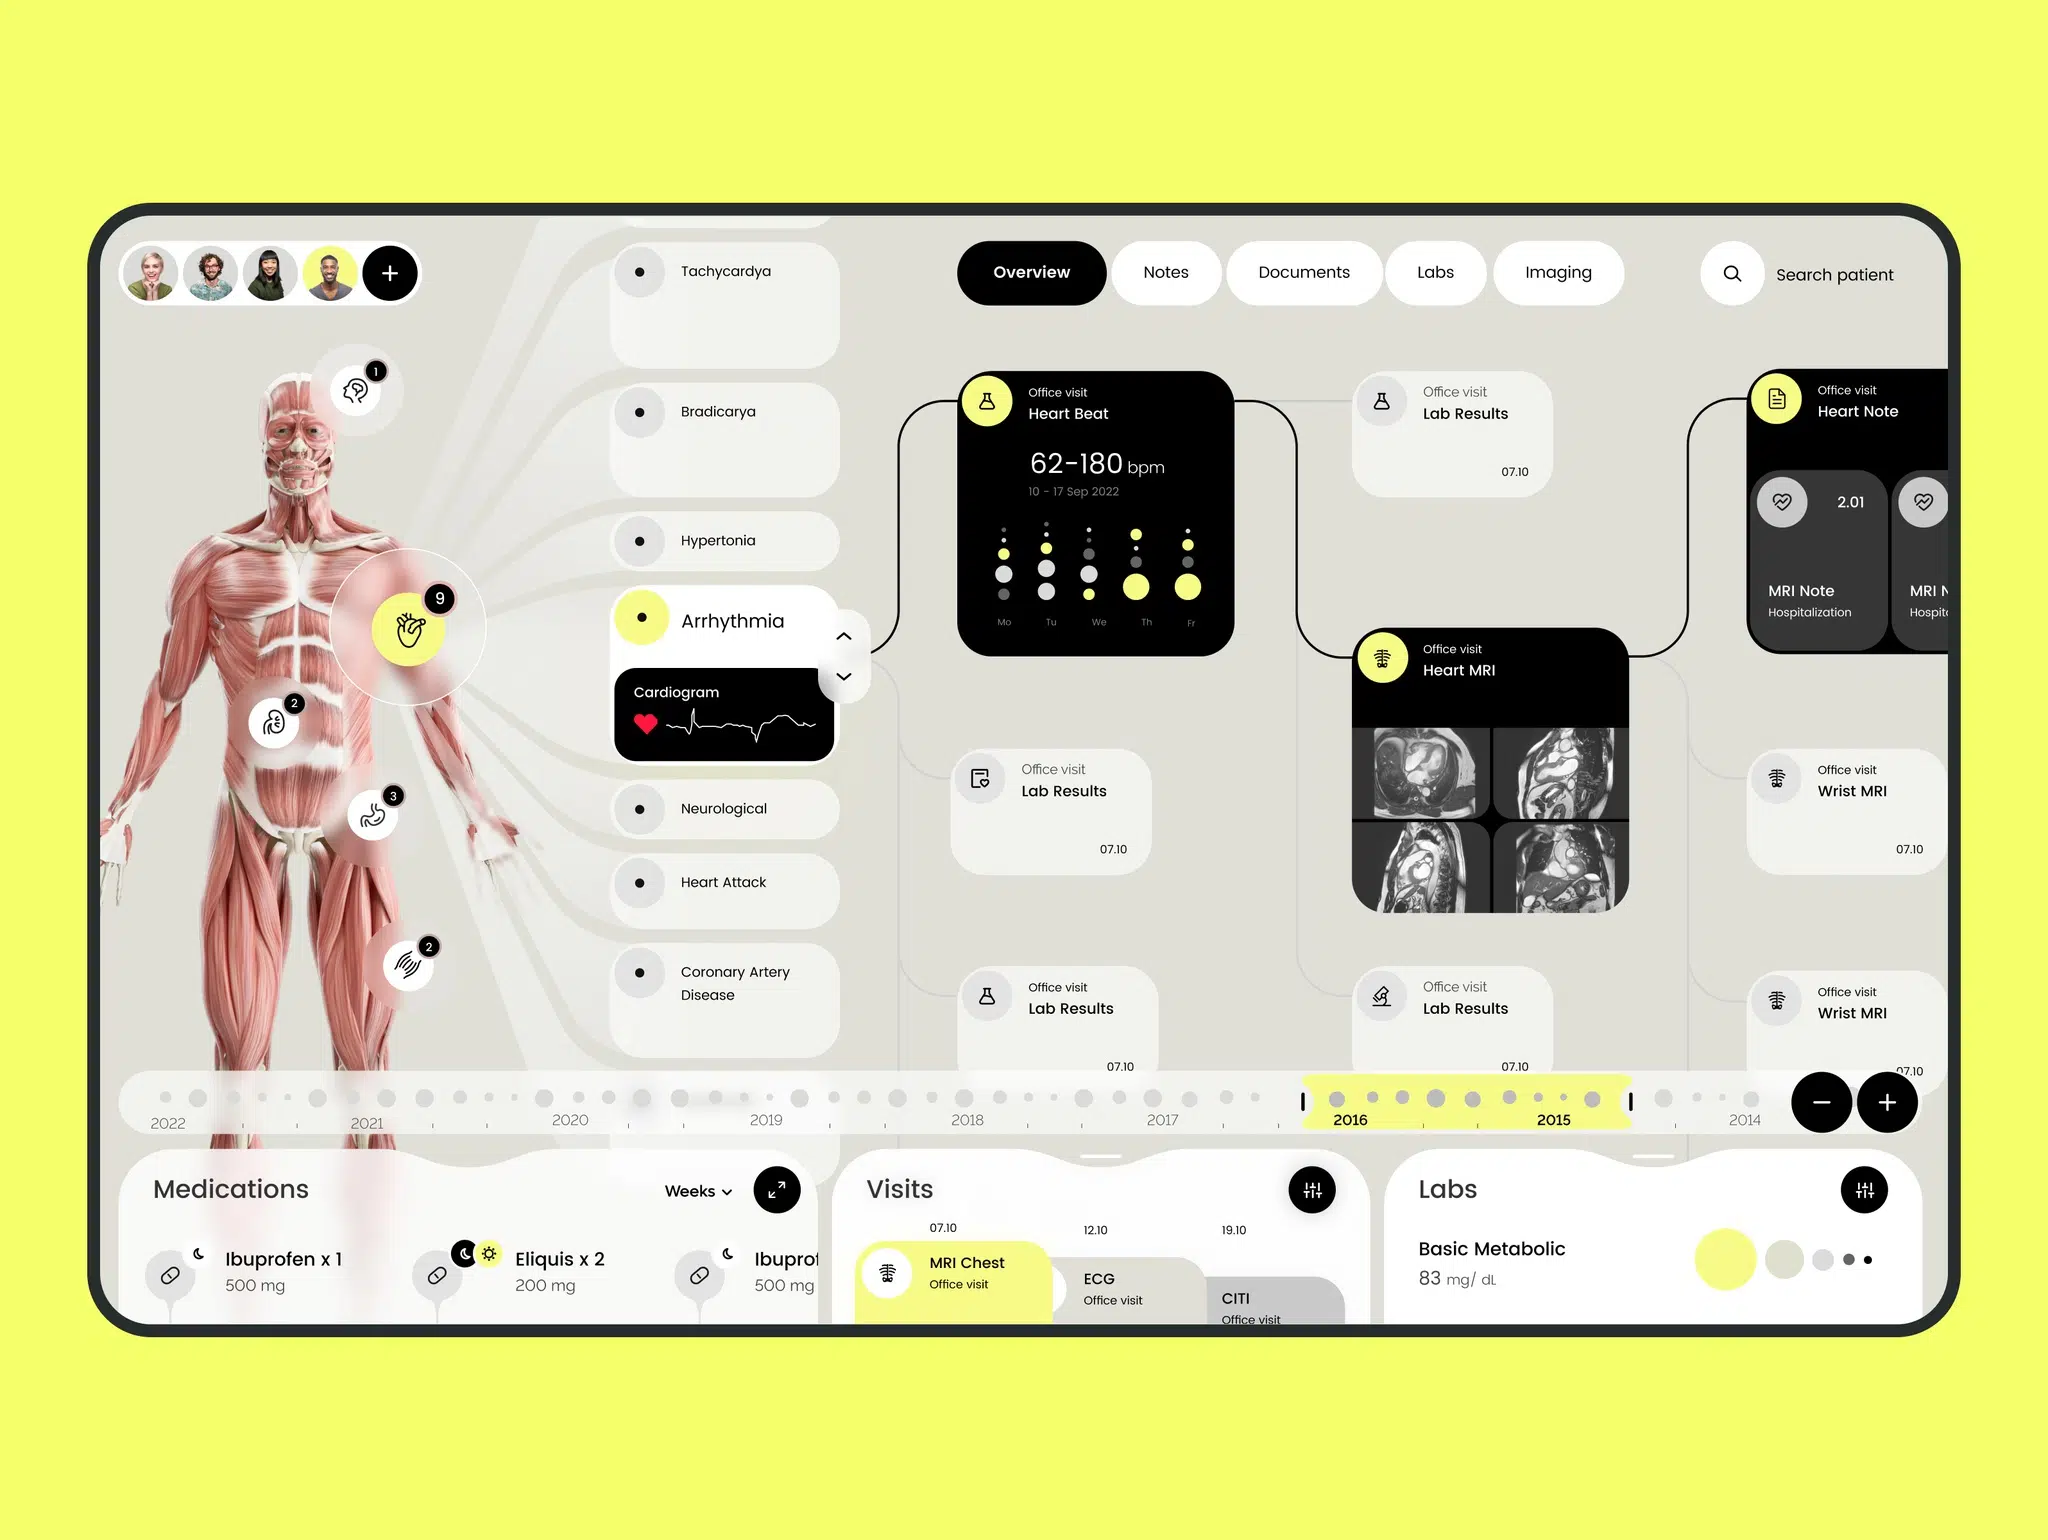 A cover of "Medical ui" cluster. The owner is obear. The cluster consists of 8 elements.